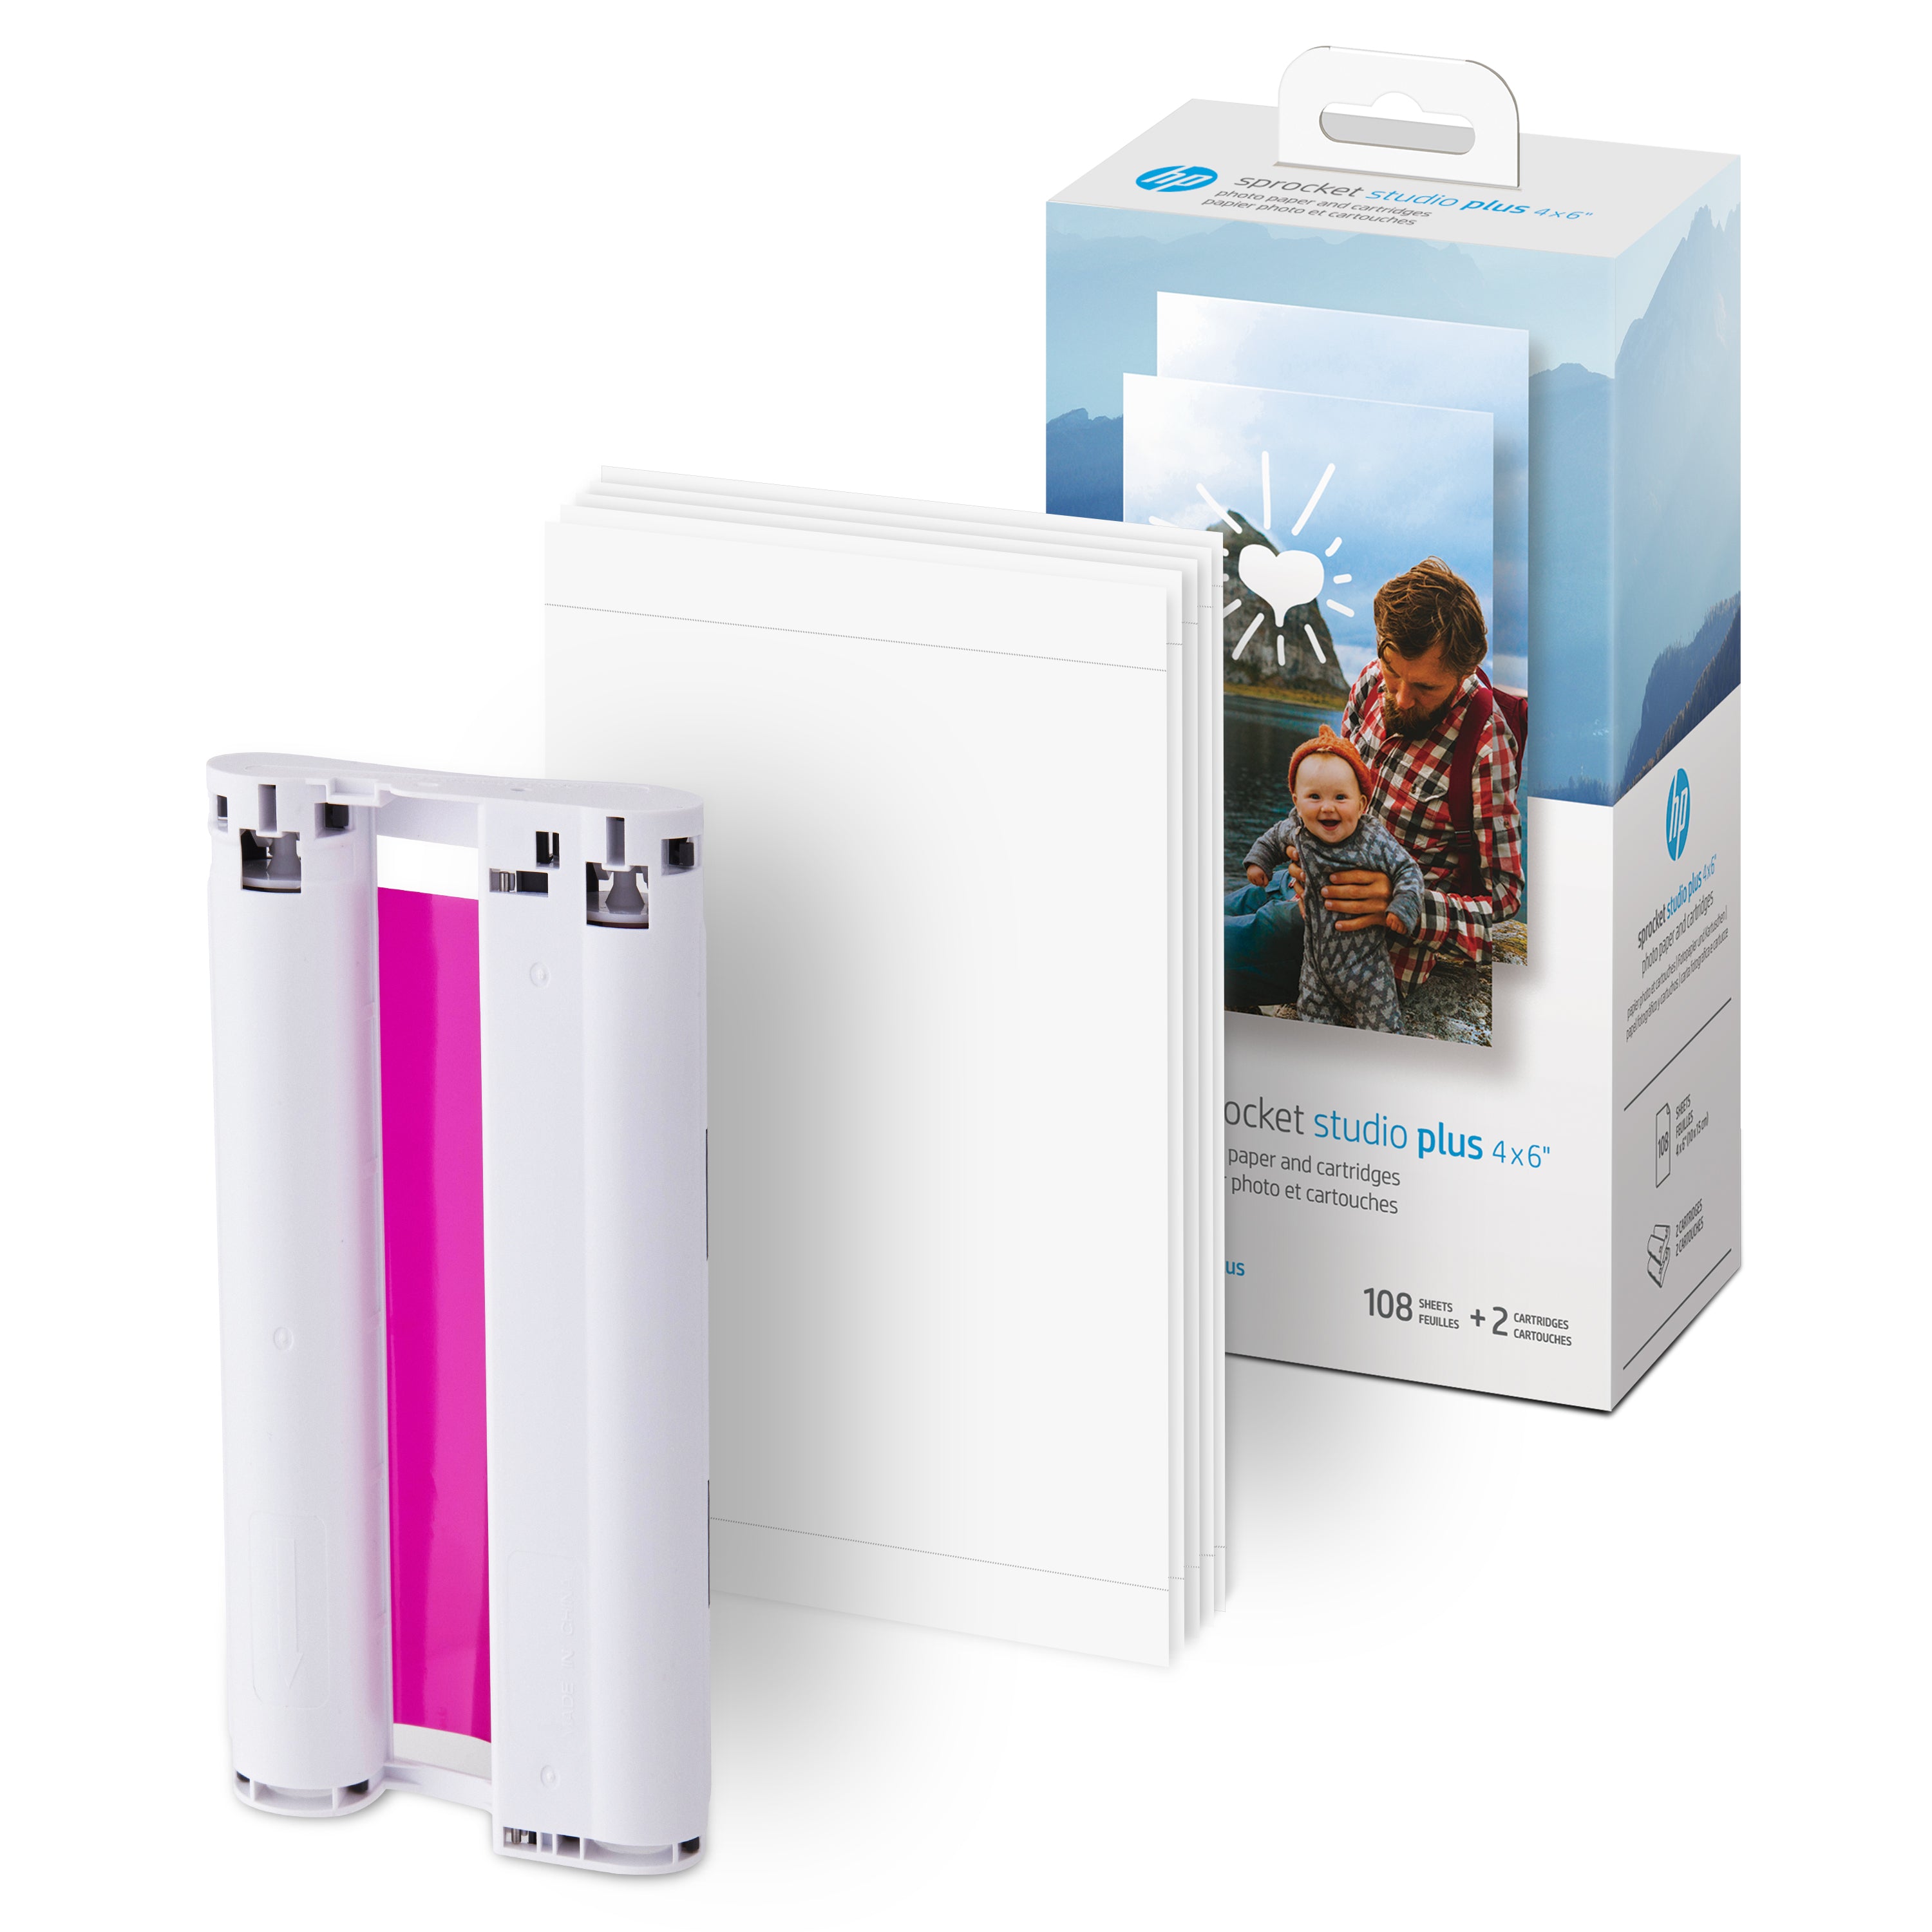 HP Sprocket Studio Plus 4 x 6” Photo Paper and Cartridges (Includes 324 Sheets and 6 Cartridges) – Compatible only with HP Sprocket Studio Plus printer Sprocket Printers